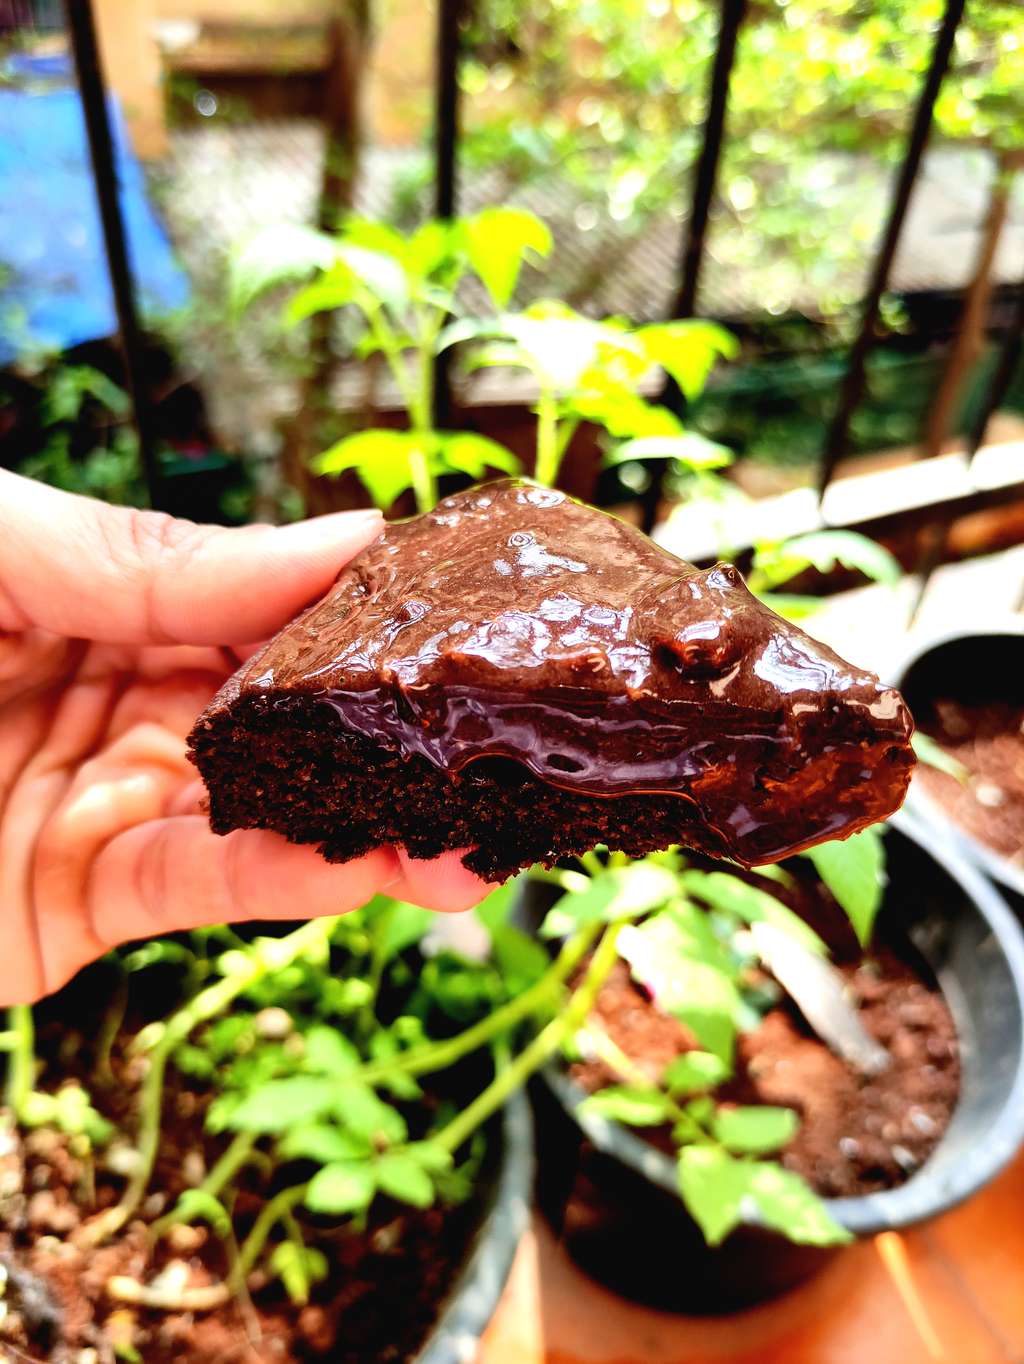 Chocolate Cake With High Protein Frosting!